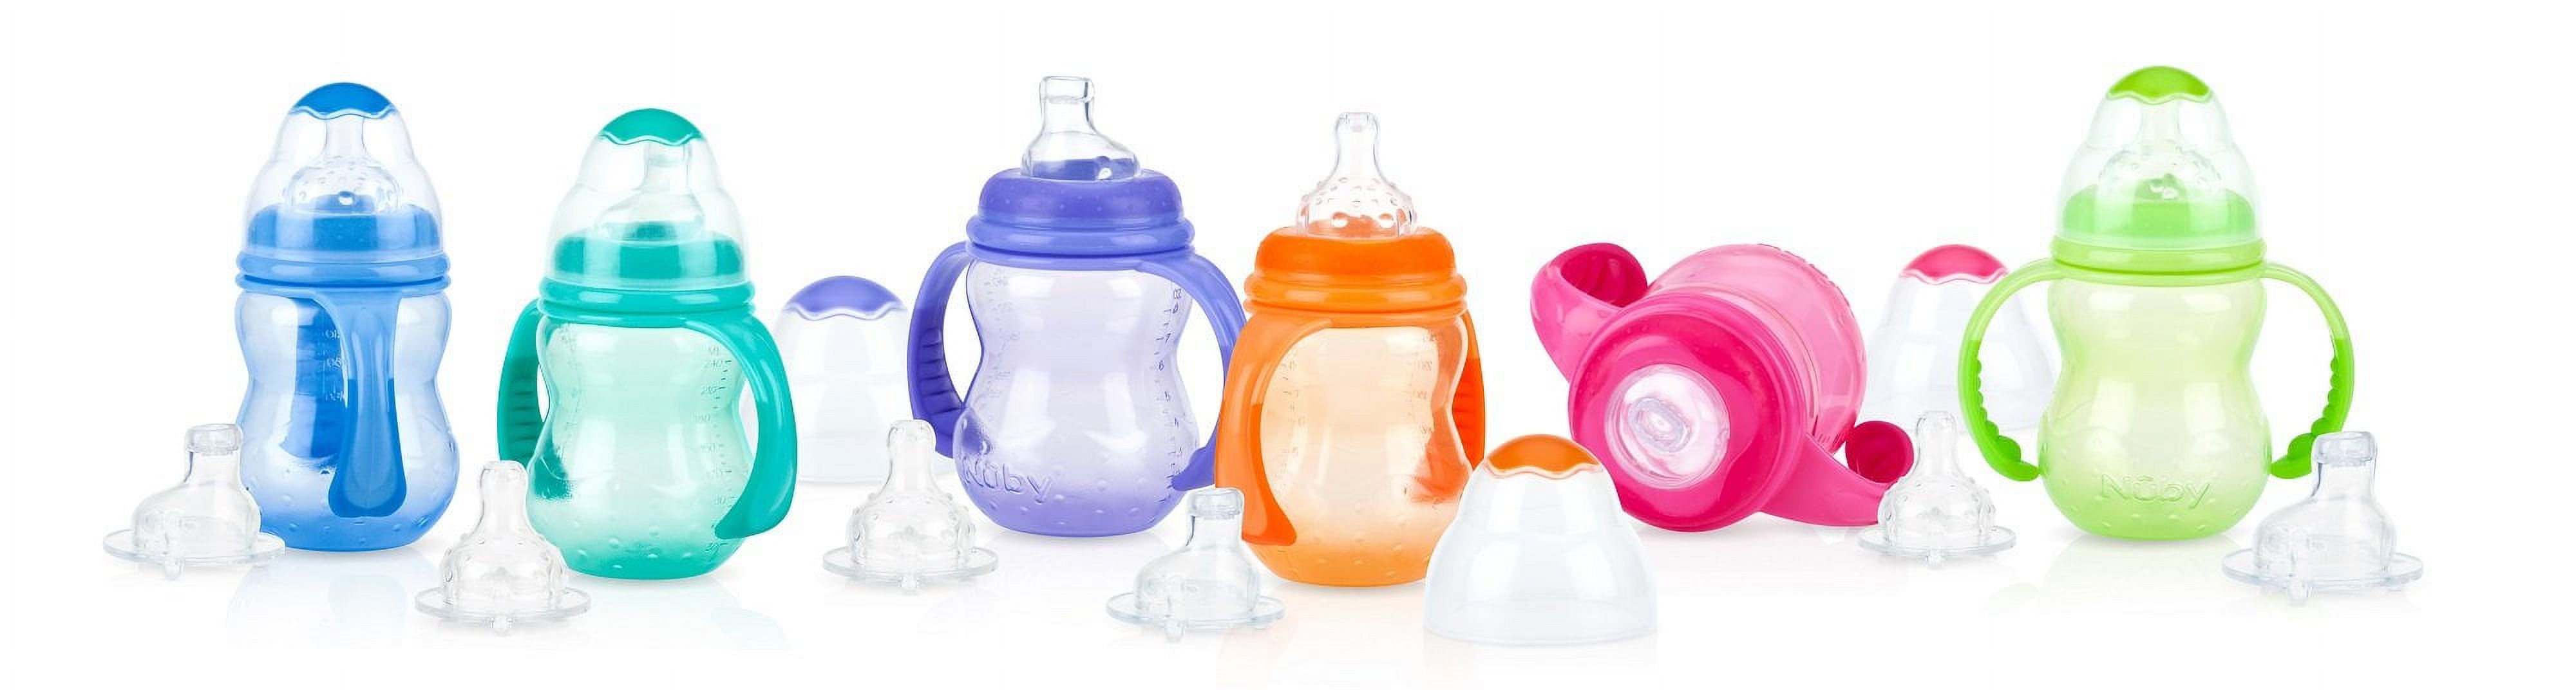 Nuby 3 Stage Baby Bottle with Handles, 3m+, Wide-Neck, 8 oz - image 1 of 3